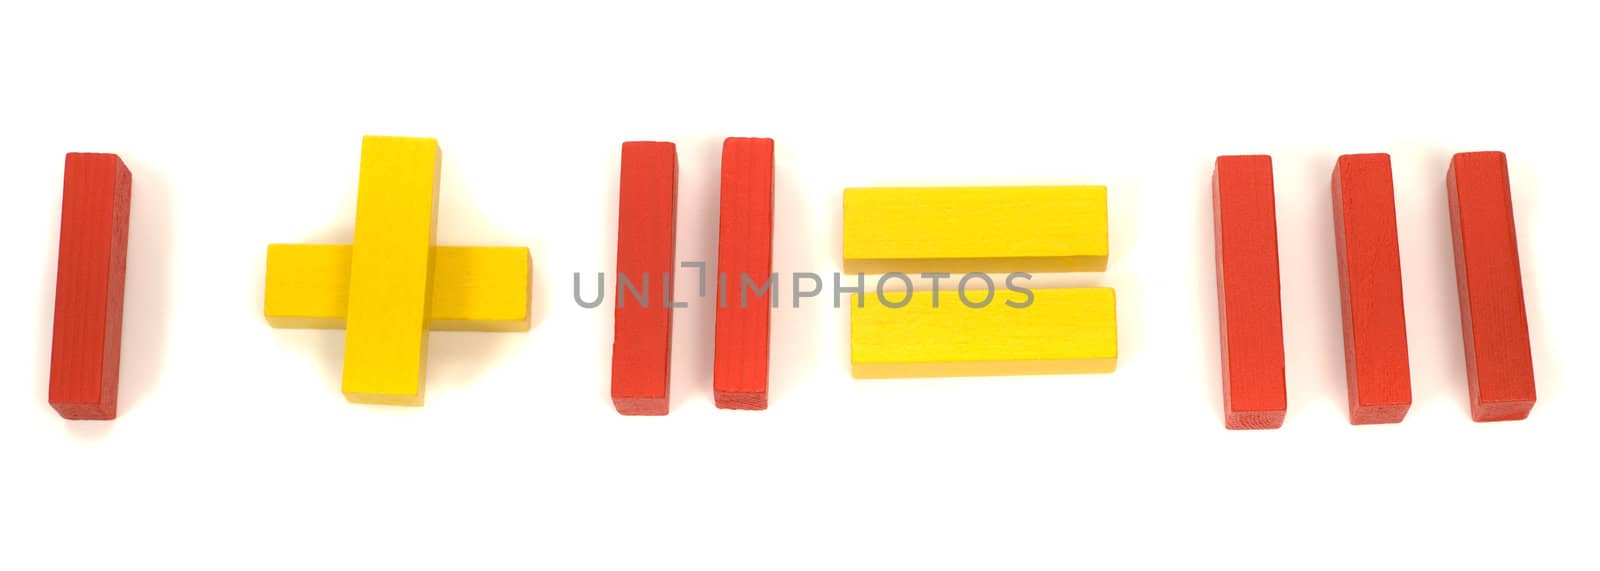 Red and yellow blocks spelling out that 1 and 2 equals 3